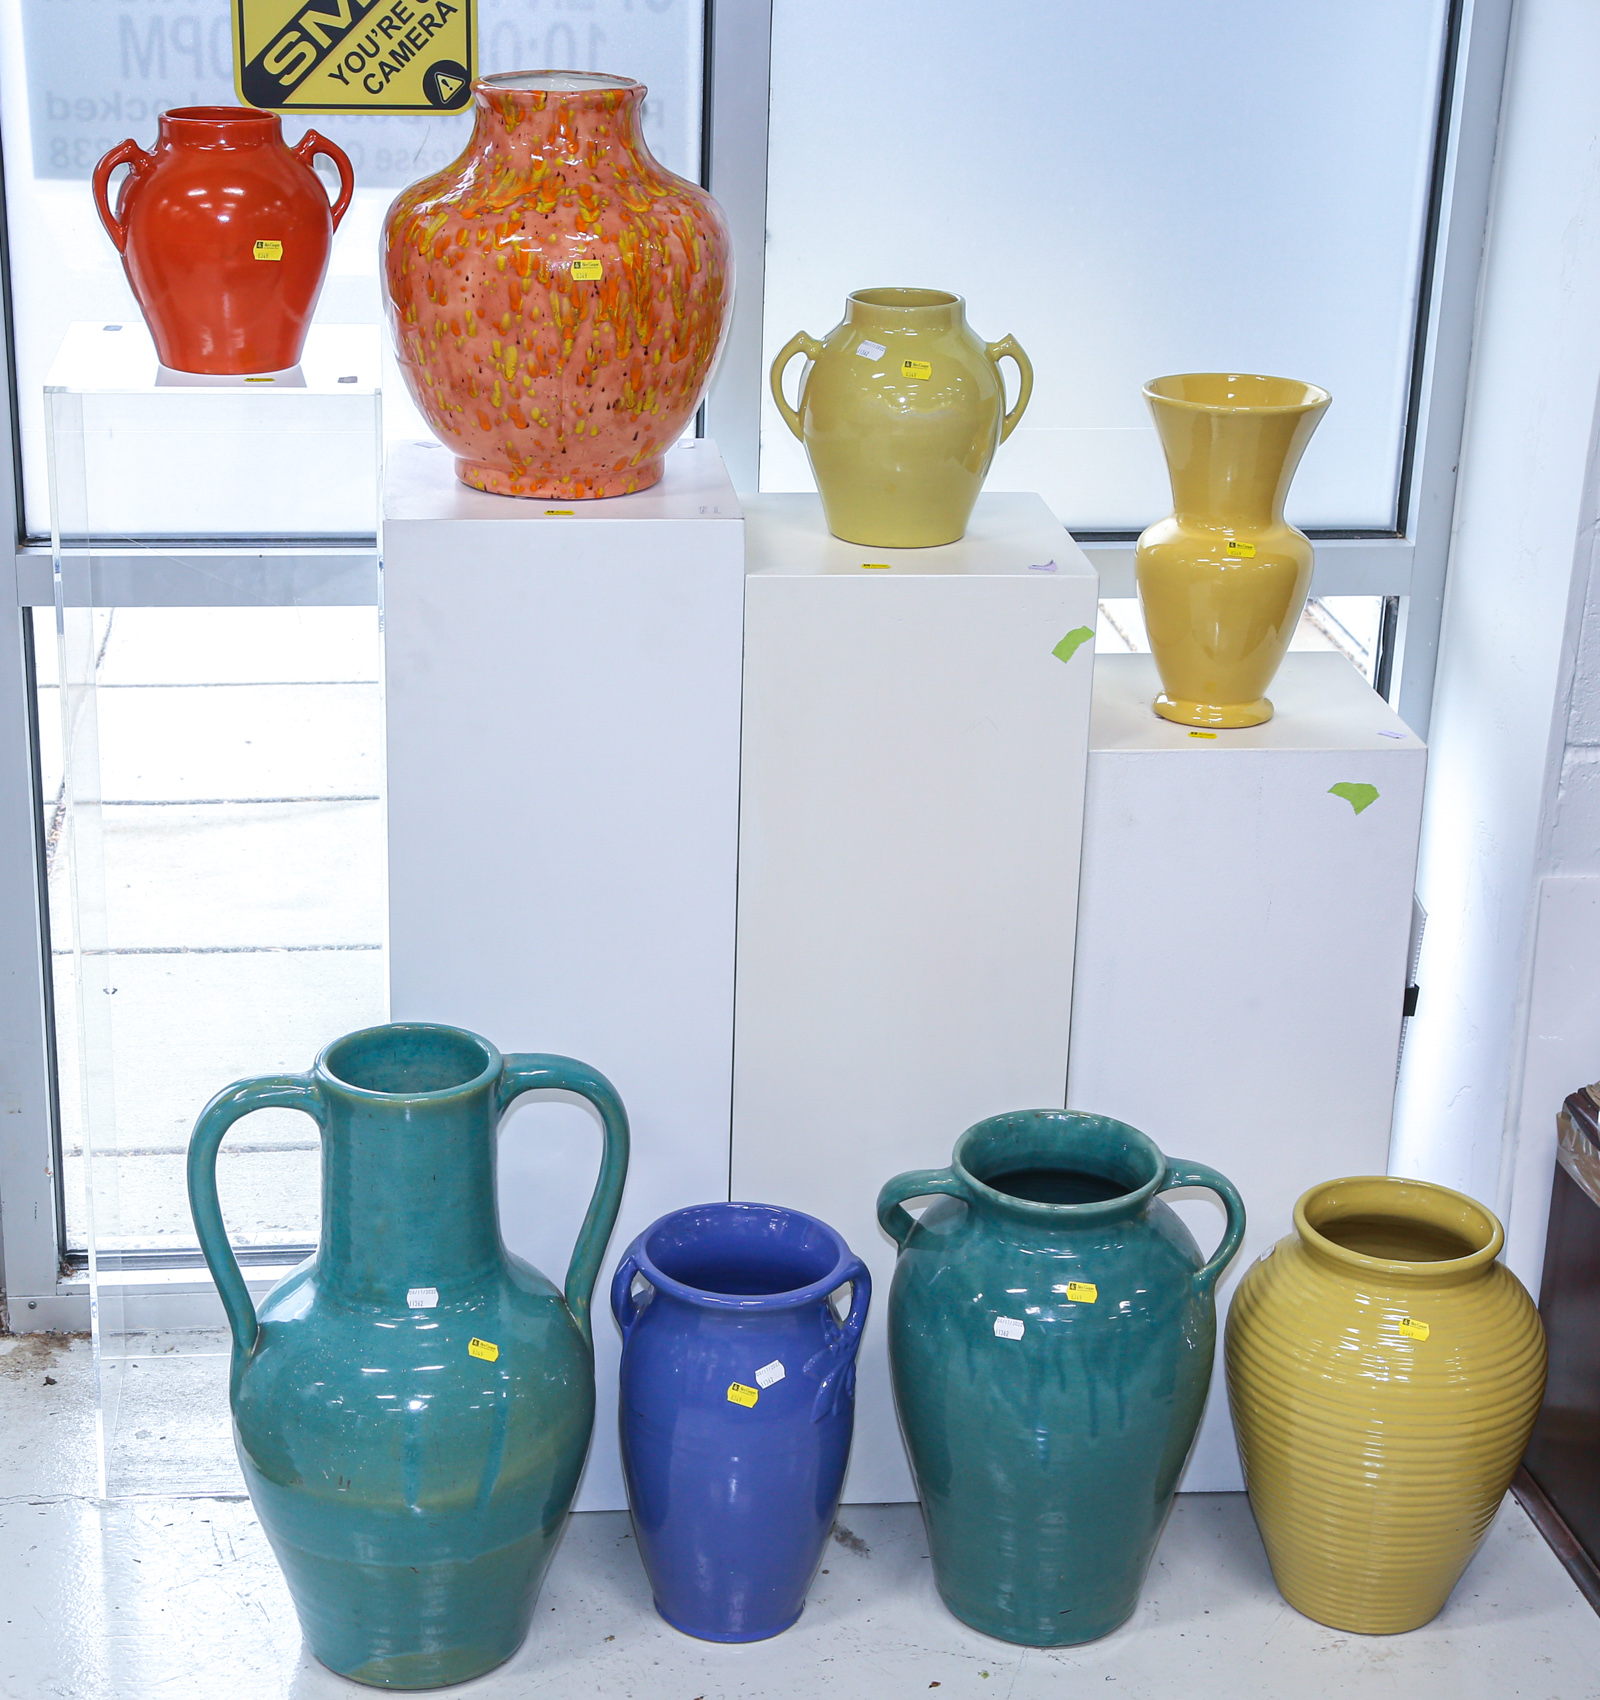 EIGHT COLORFUL POTTERY VASES 8